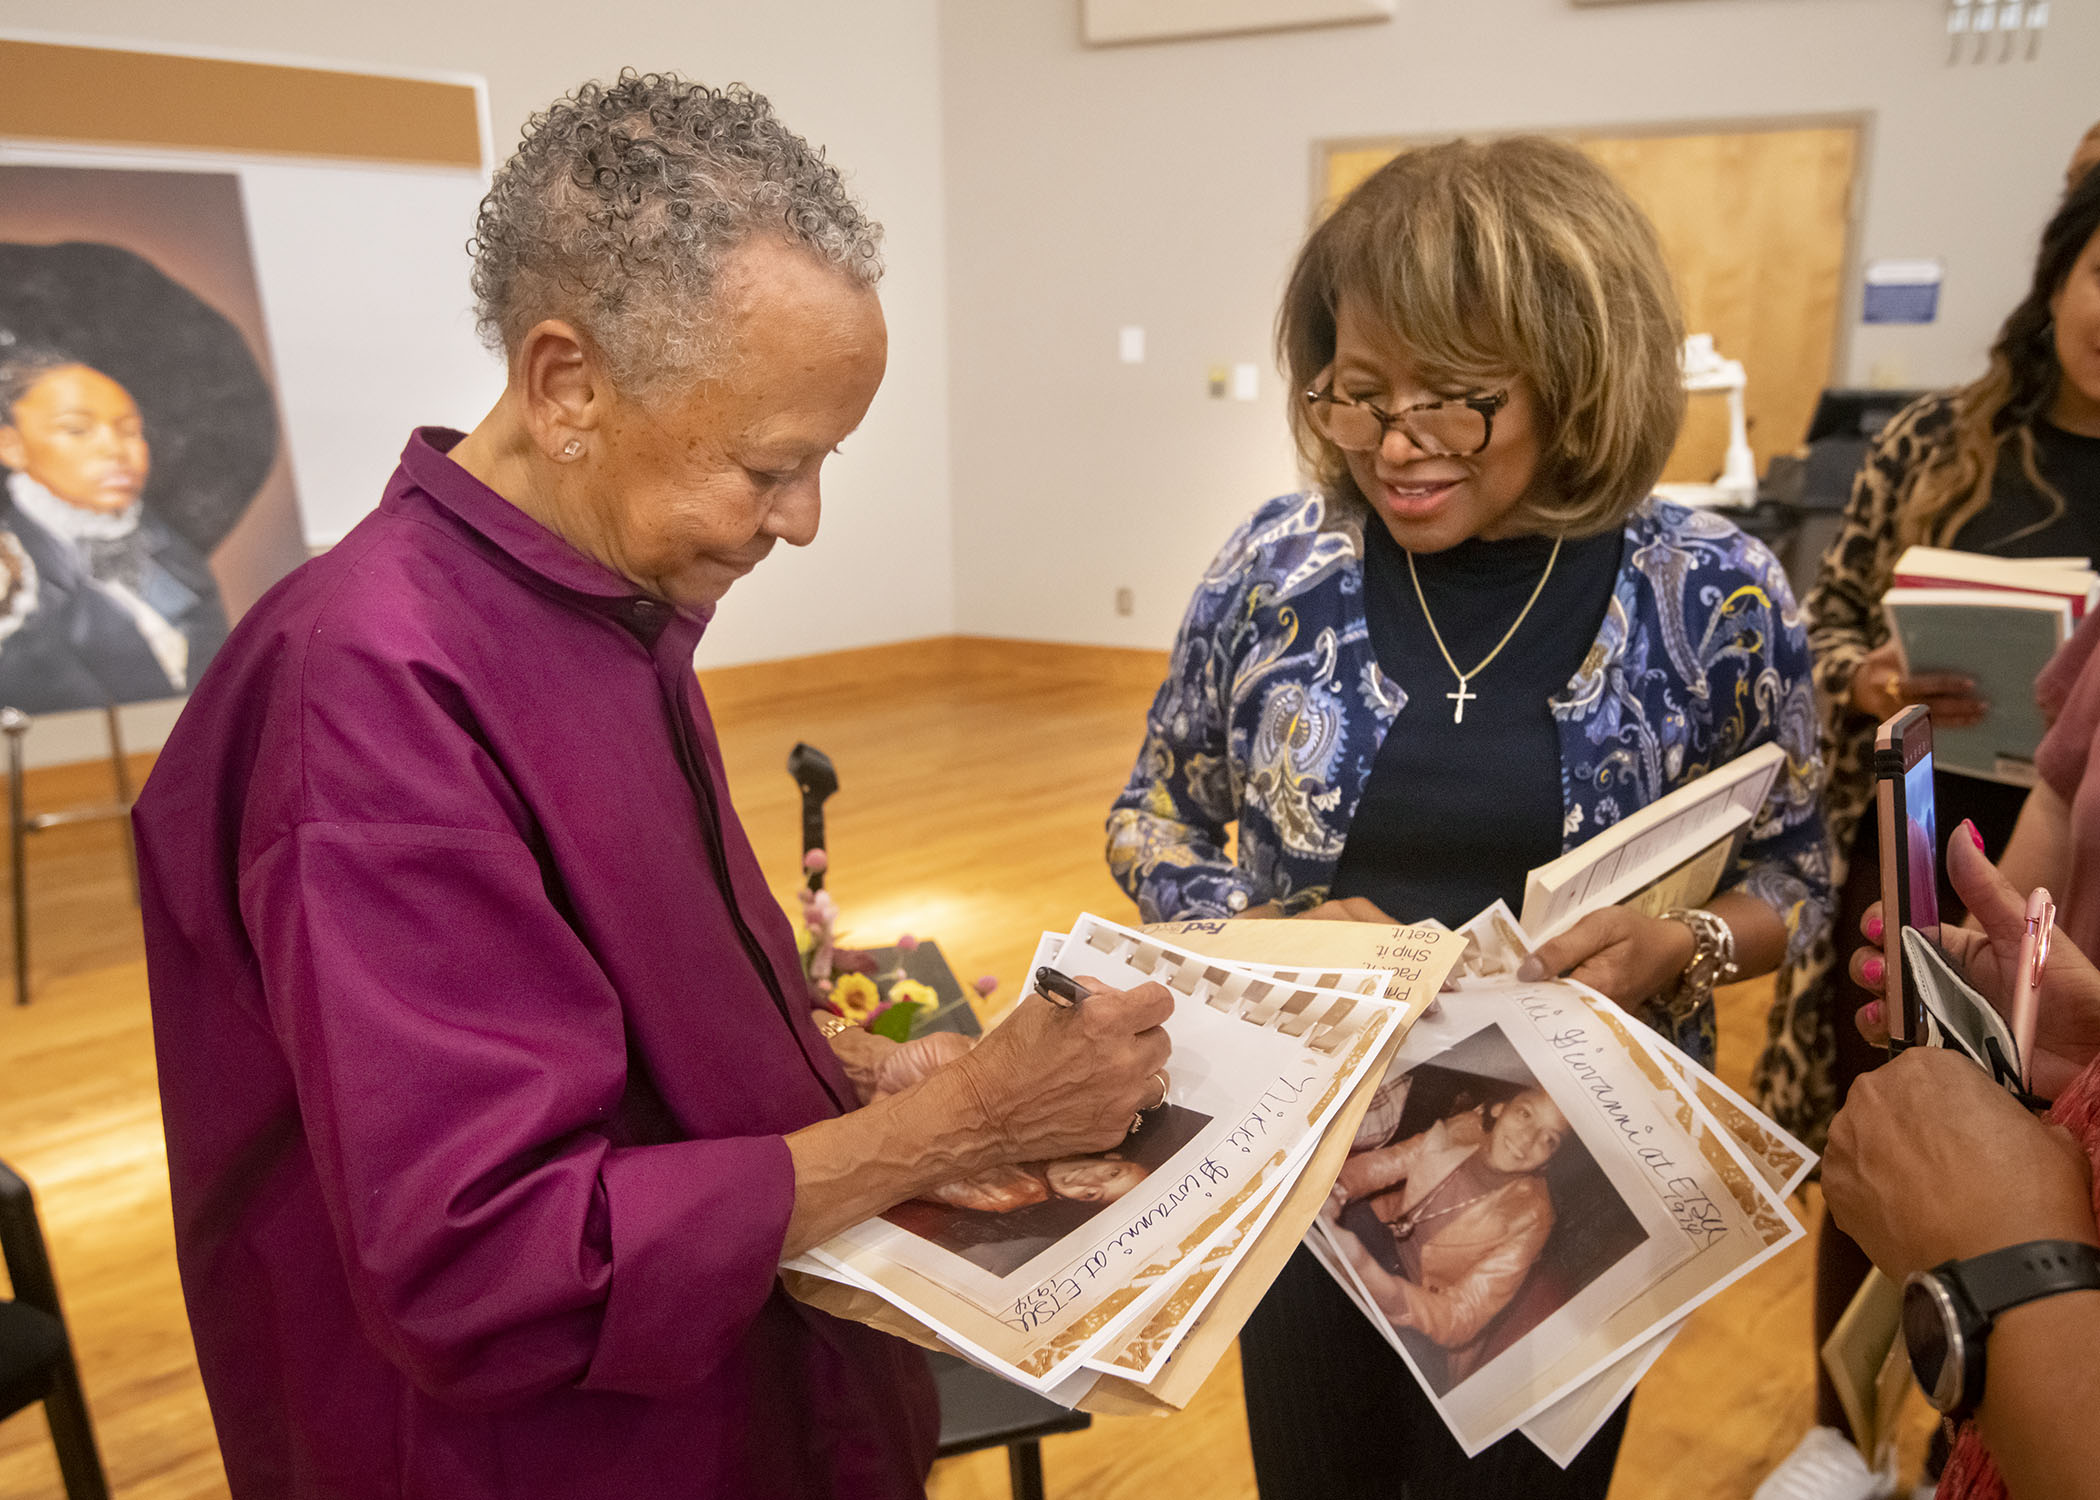 Nikki Giovanni signs photos from her 1974 visit to ETSU for Trustee Dorothy Grisham